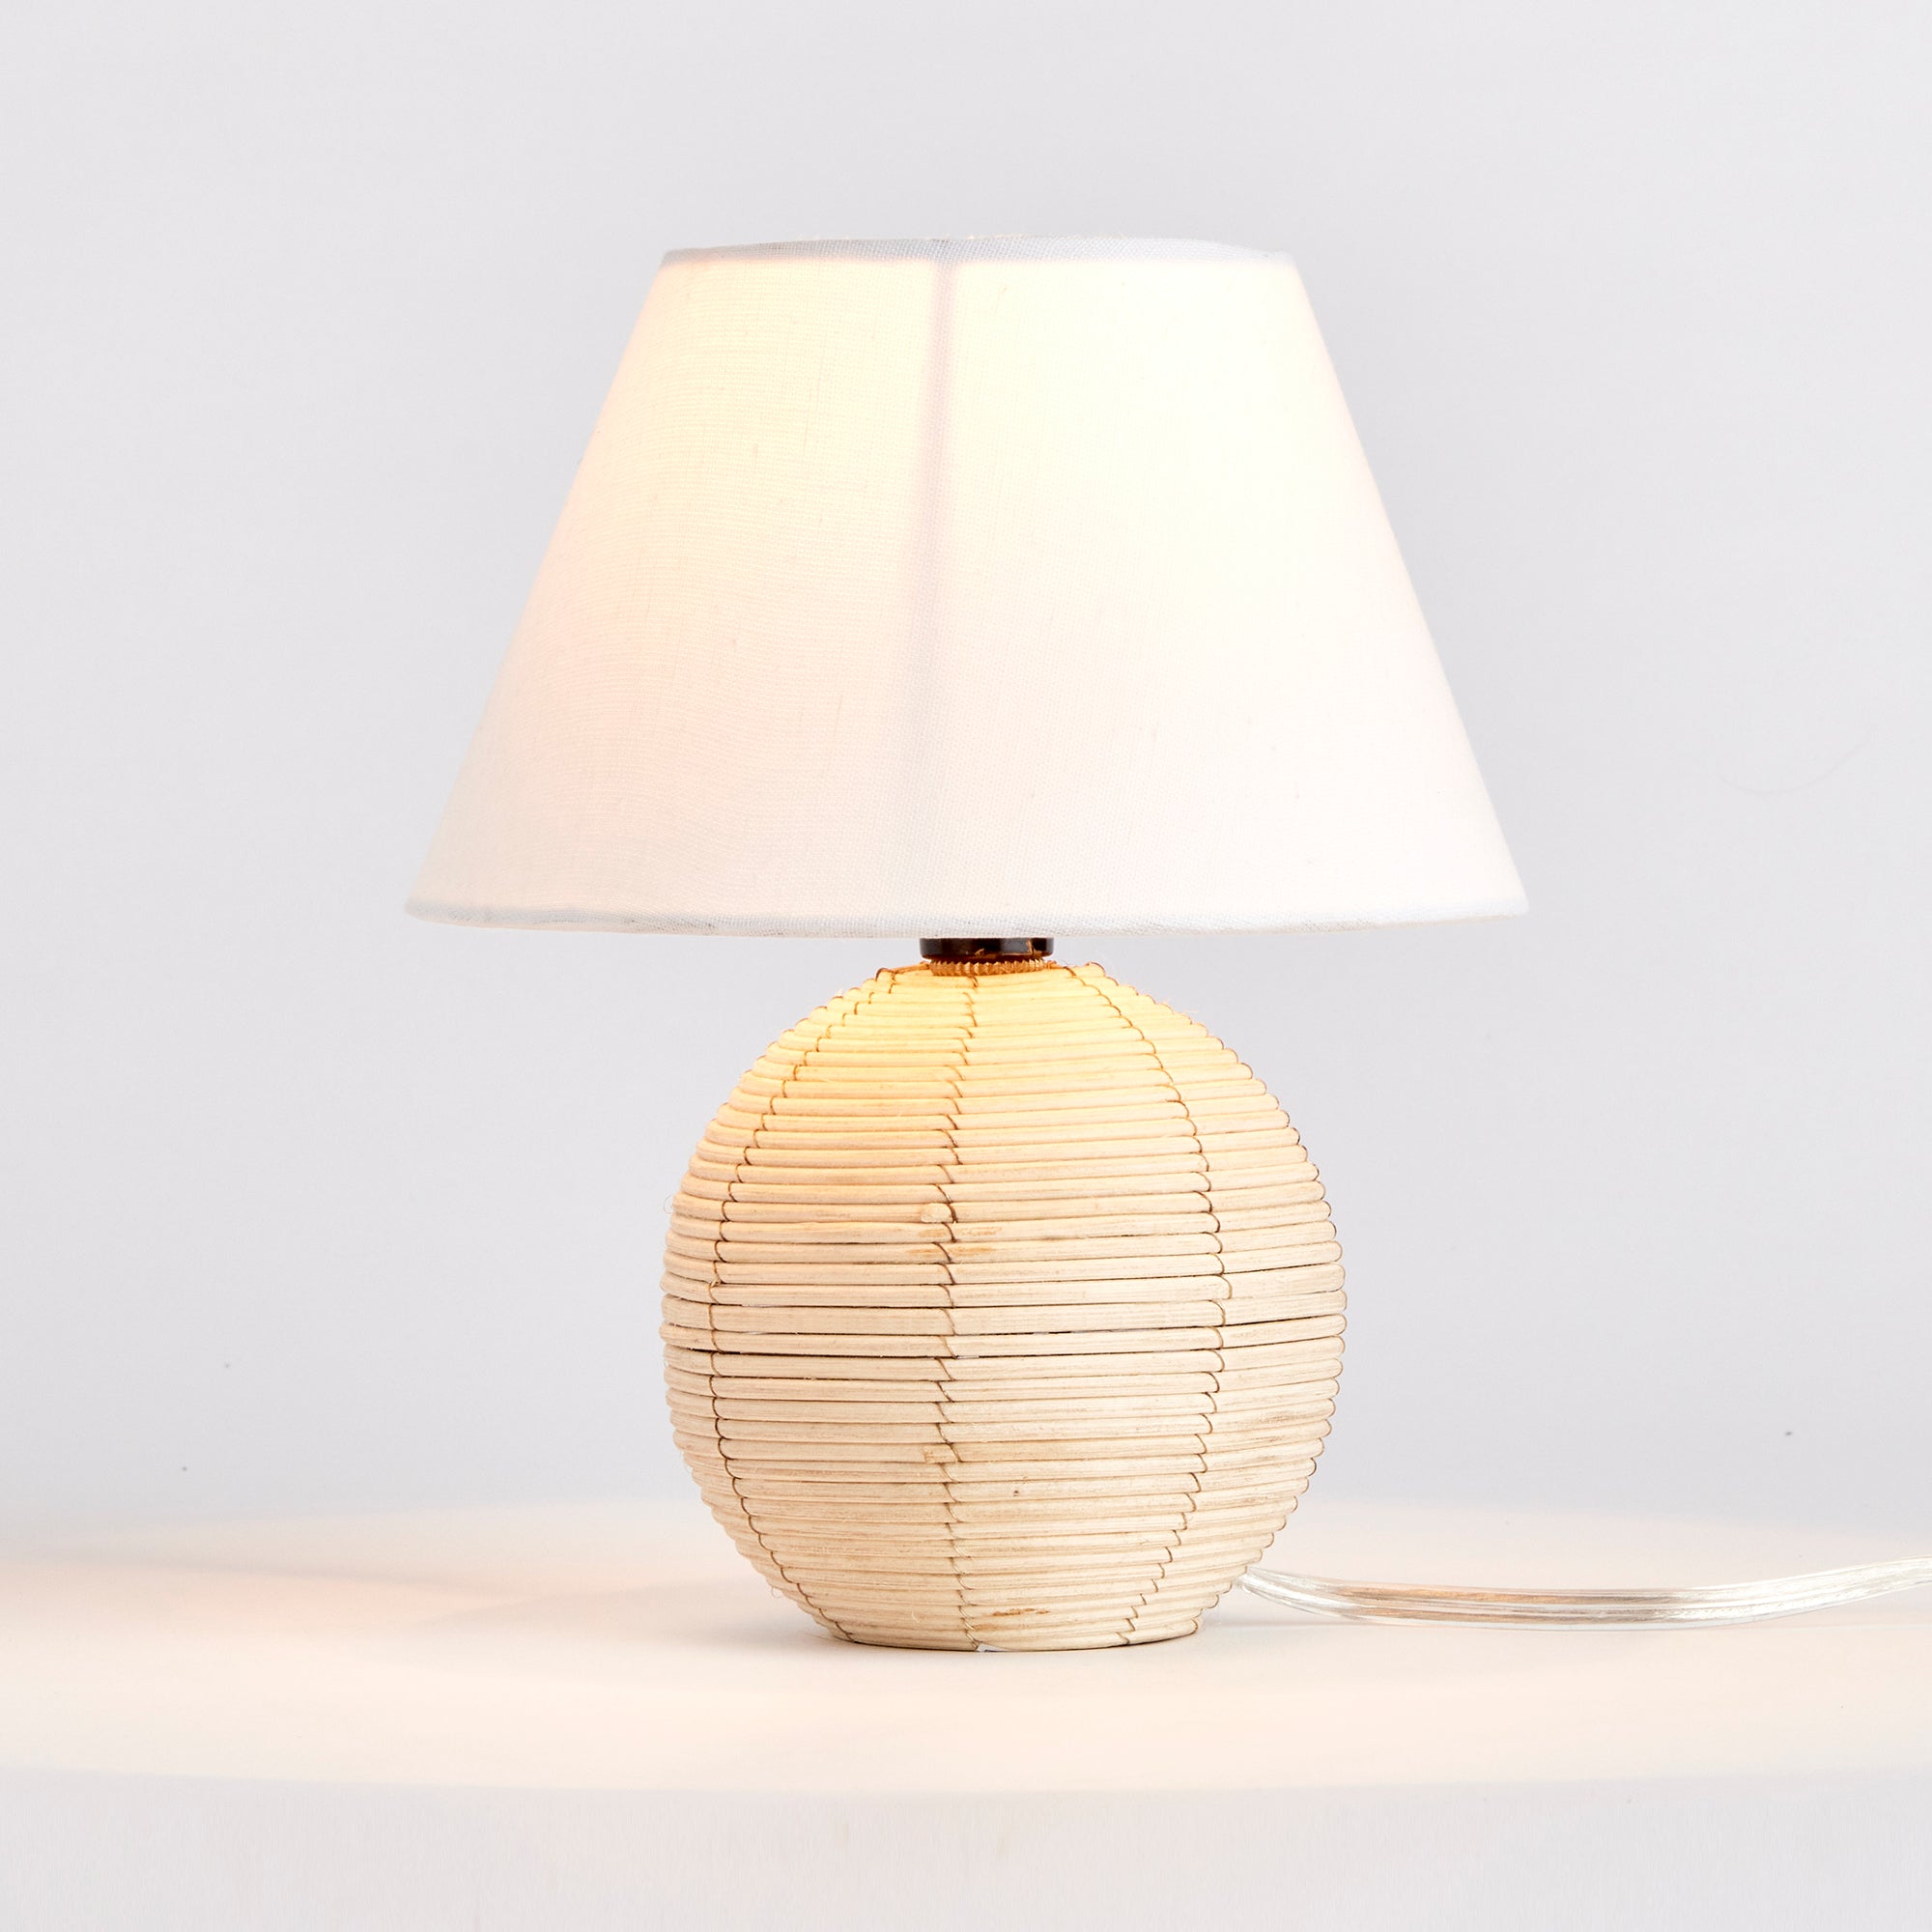 Woven in a natural cane rattan, with subtle variations in color making each one truly unique, this mini lamp is an instant classic. The petite shape and tailored shade make it the ideal lamp for kitchen counter or small workspace. Amethyst Home provides interior design, new construction, custom furniture, and area rugs in the Portland metro area.